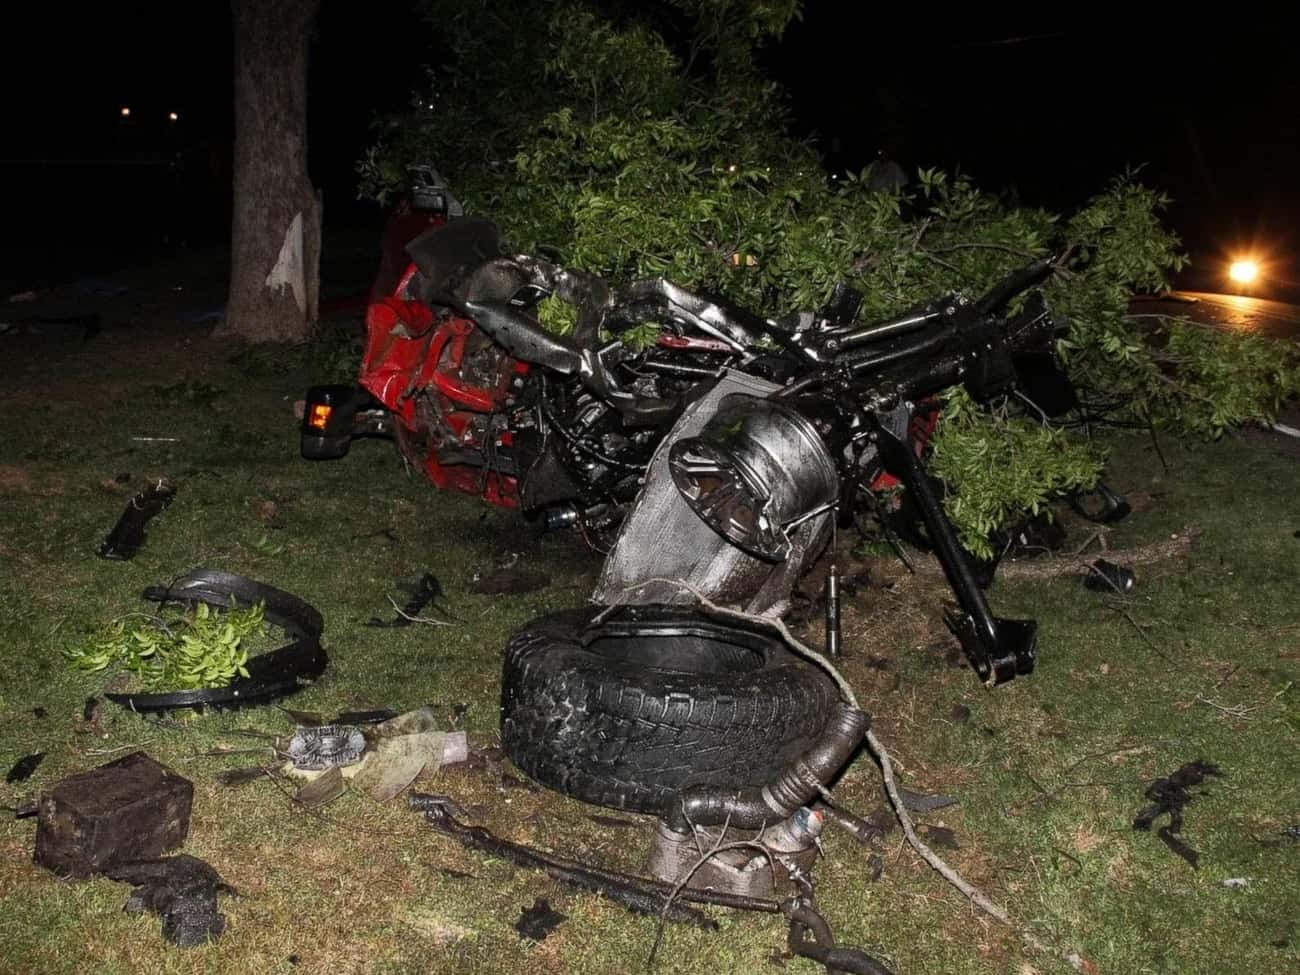 Couch's Drunk Driving Caused An Accident That Killed Four And Injured Nine